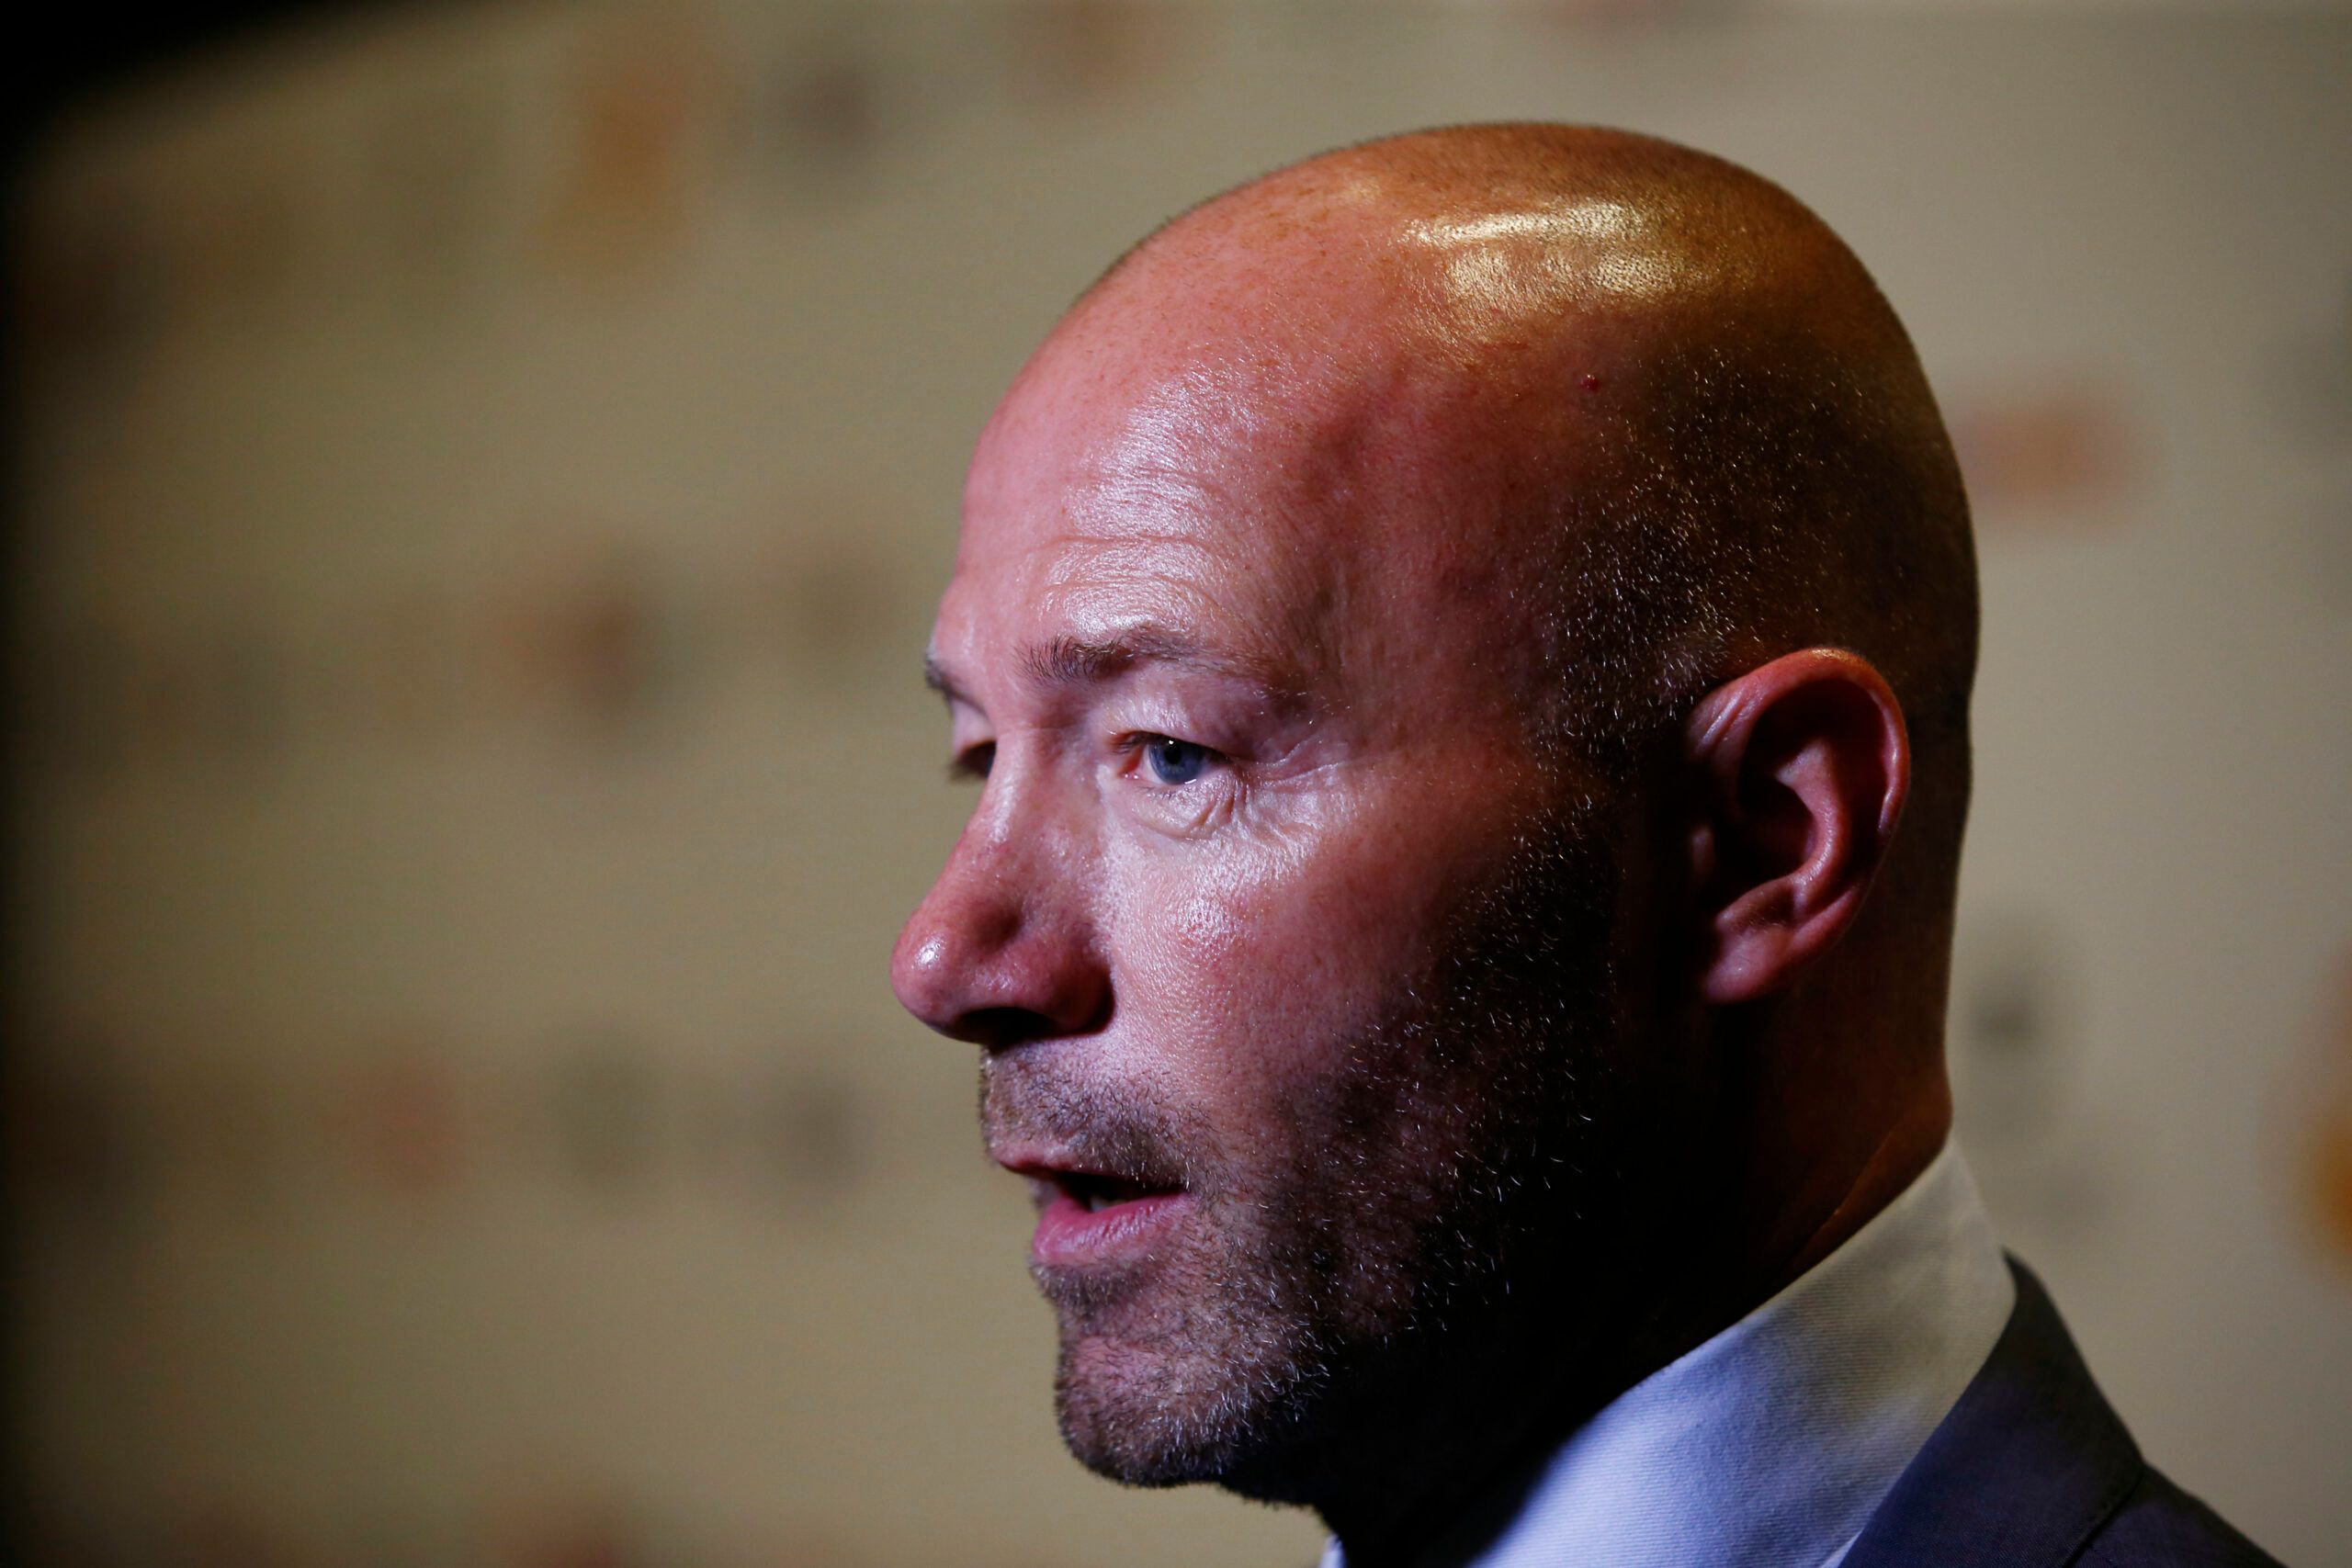 Football Soccer Britain - Premier League Legends of Football Charity Event - Grosvenor House Hotel, Park Lane, London - 5/10/16
Former Newcastle player Alan Shearer as he arrives for the Premier League Legends of Football charity event
Action Images via Reuters / Peter Cziborra
Livepic
EDITORIAL USE ONLY.